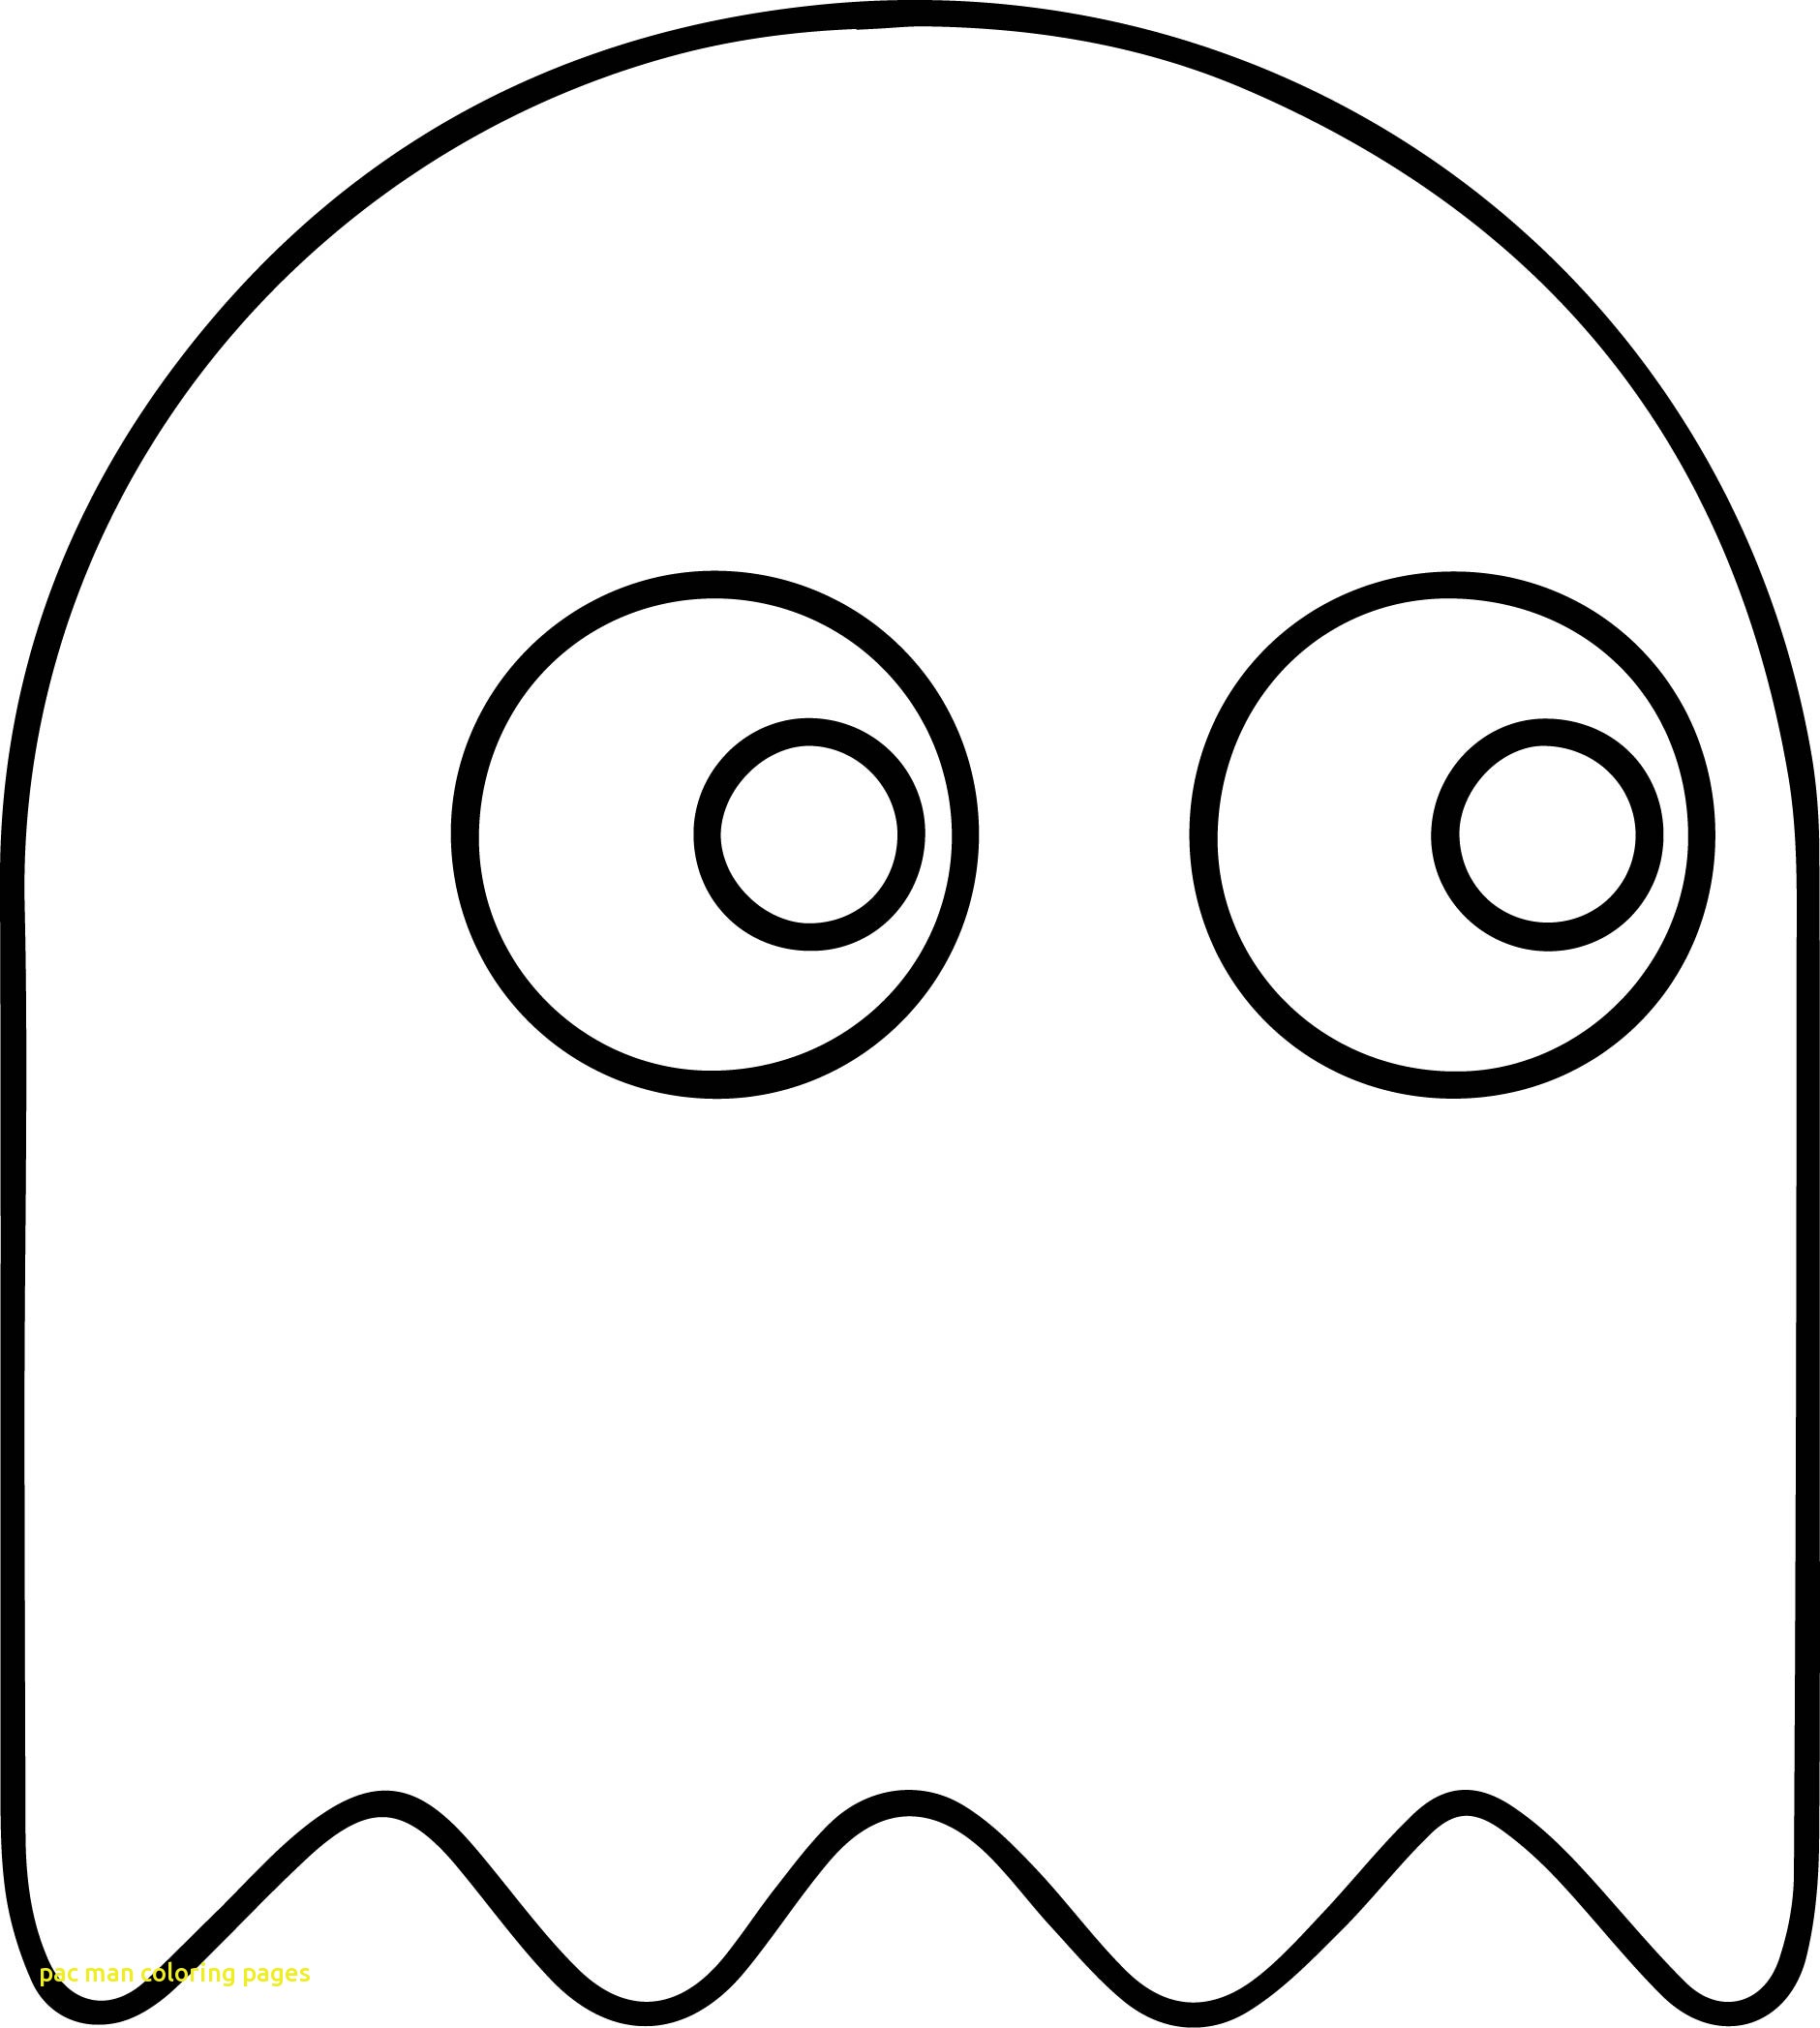 Pinky Pac Man Ghost Coloring Sheets Coloring Pages